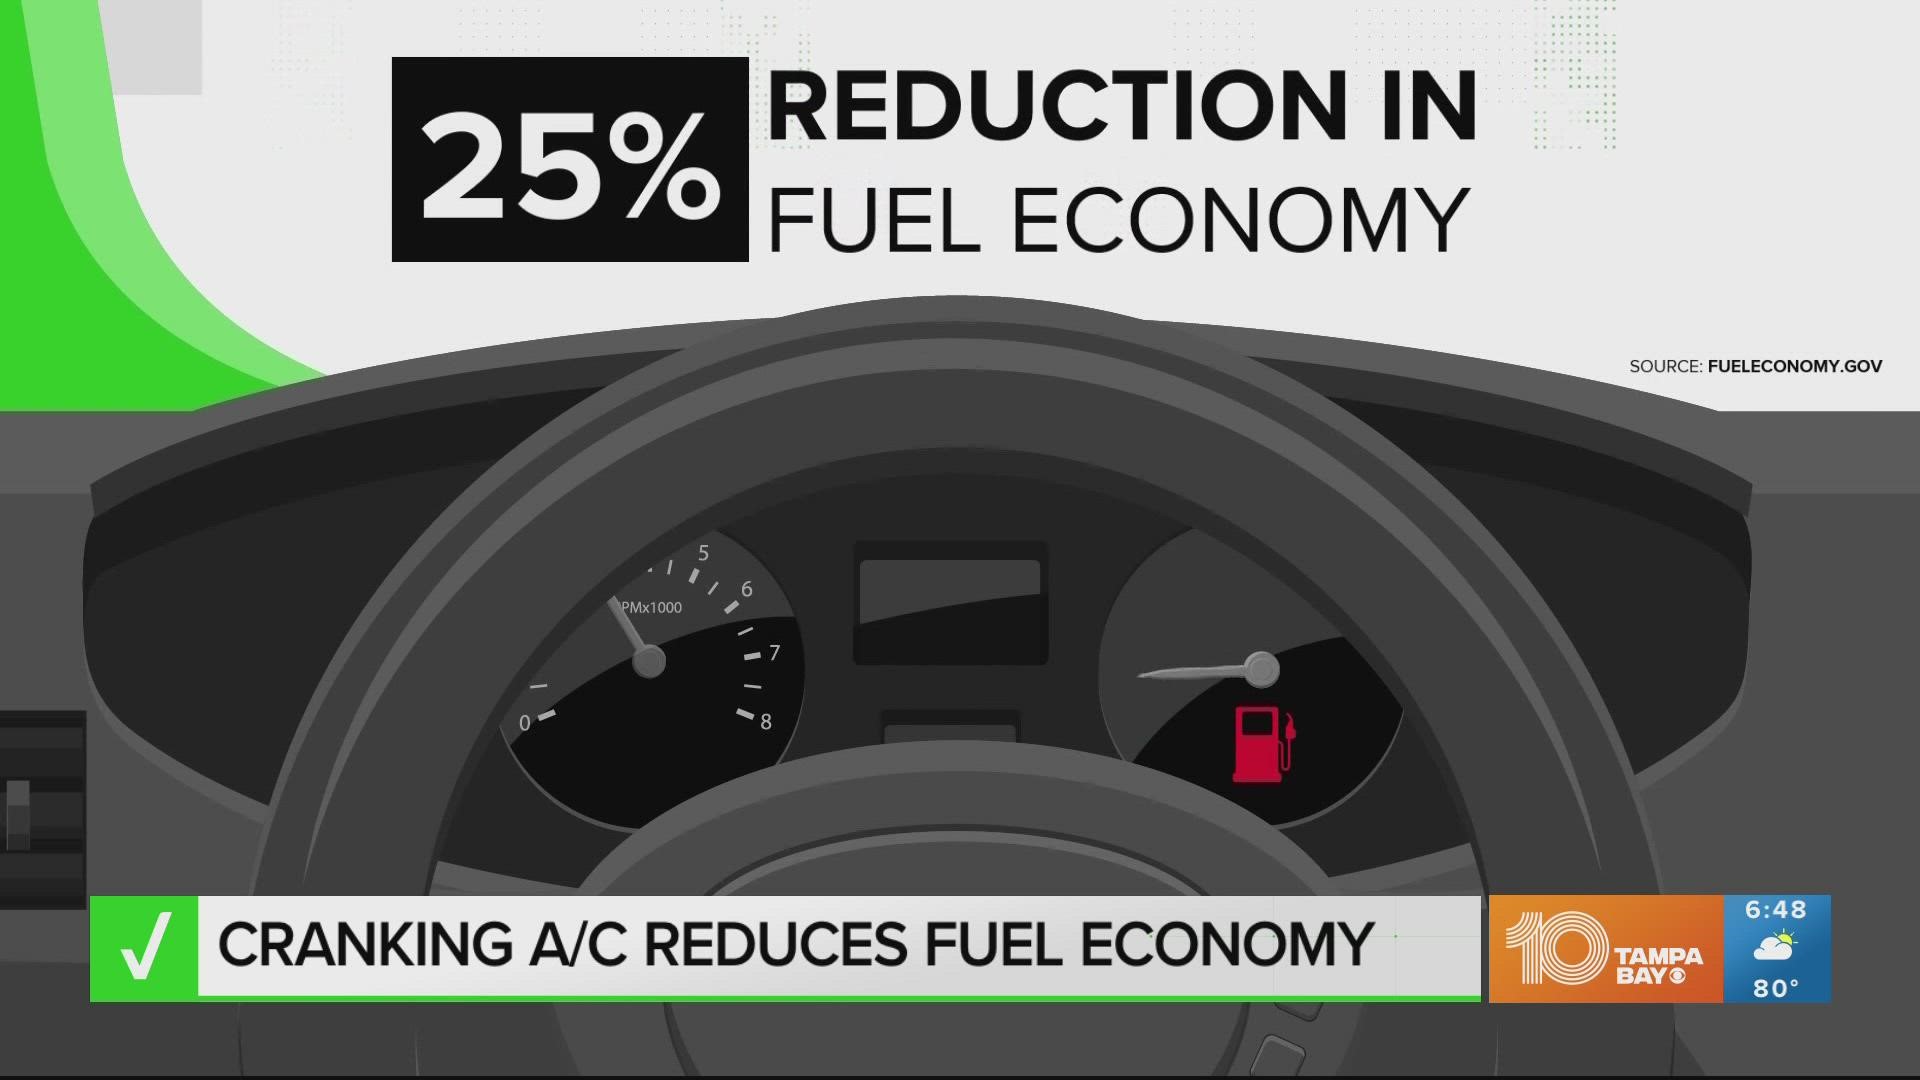 Experts say running the air when it's really hot can reduce your fuel economy by up to 25%.